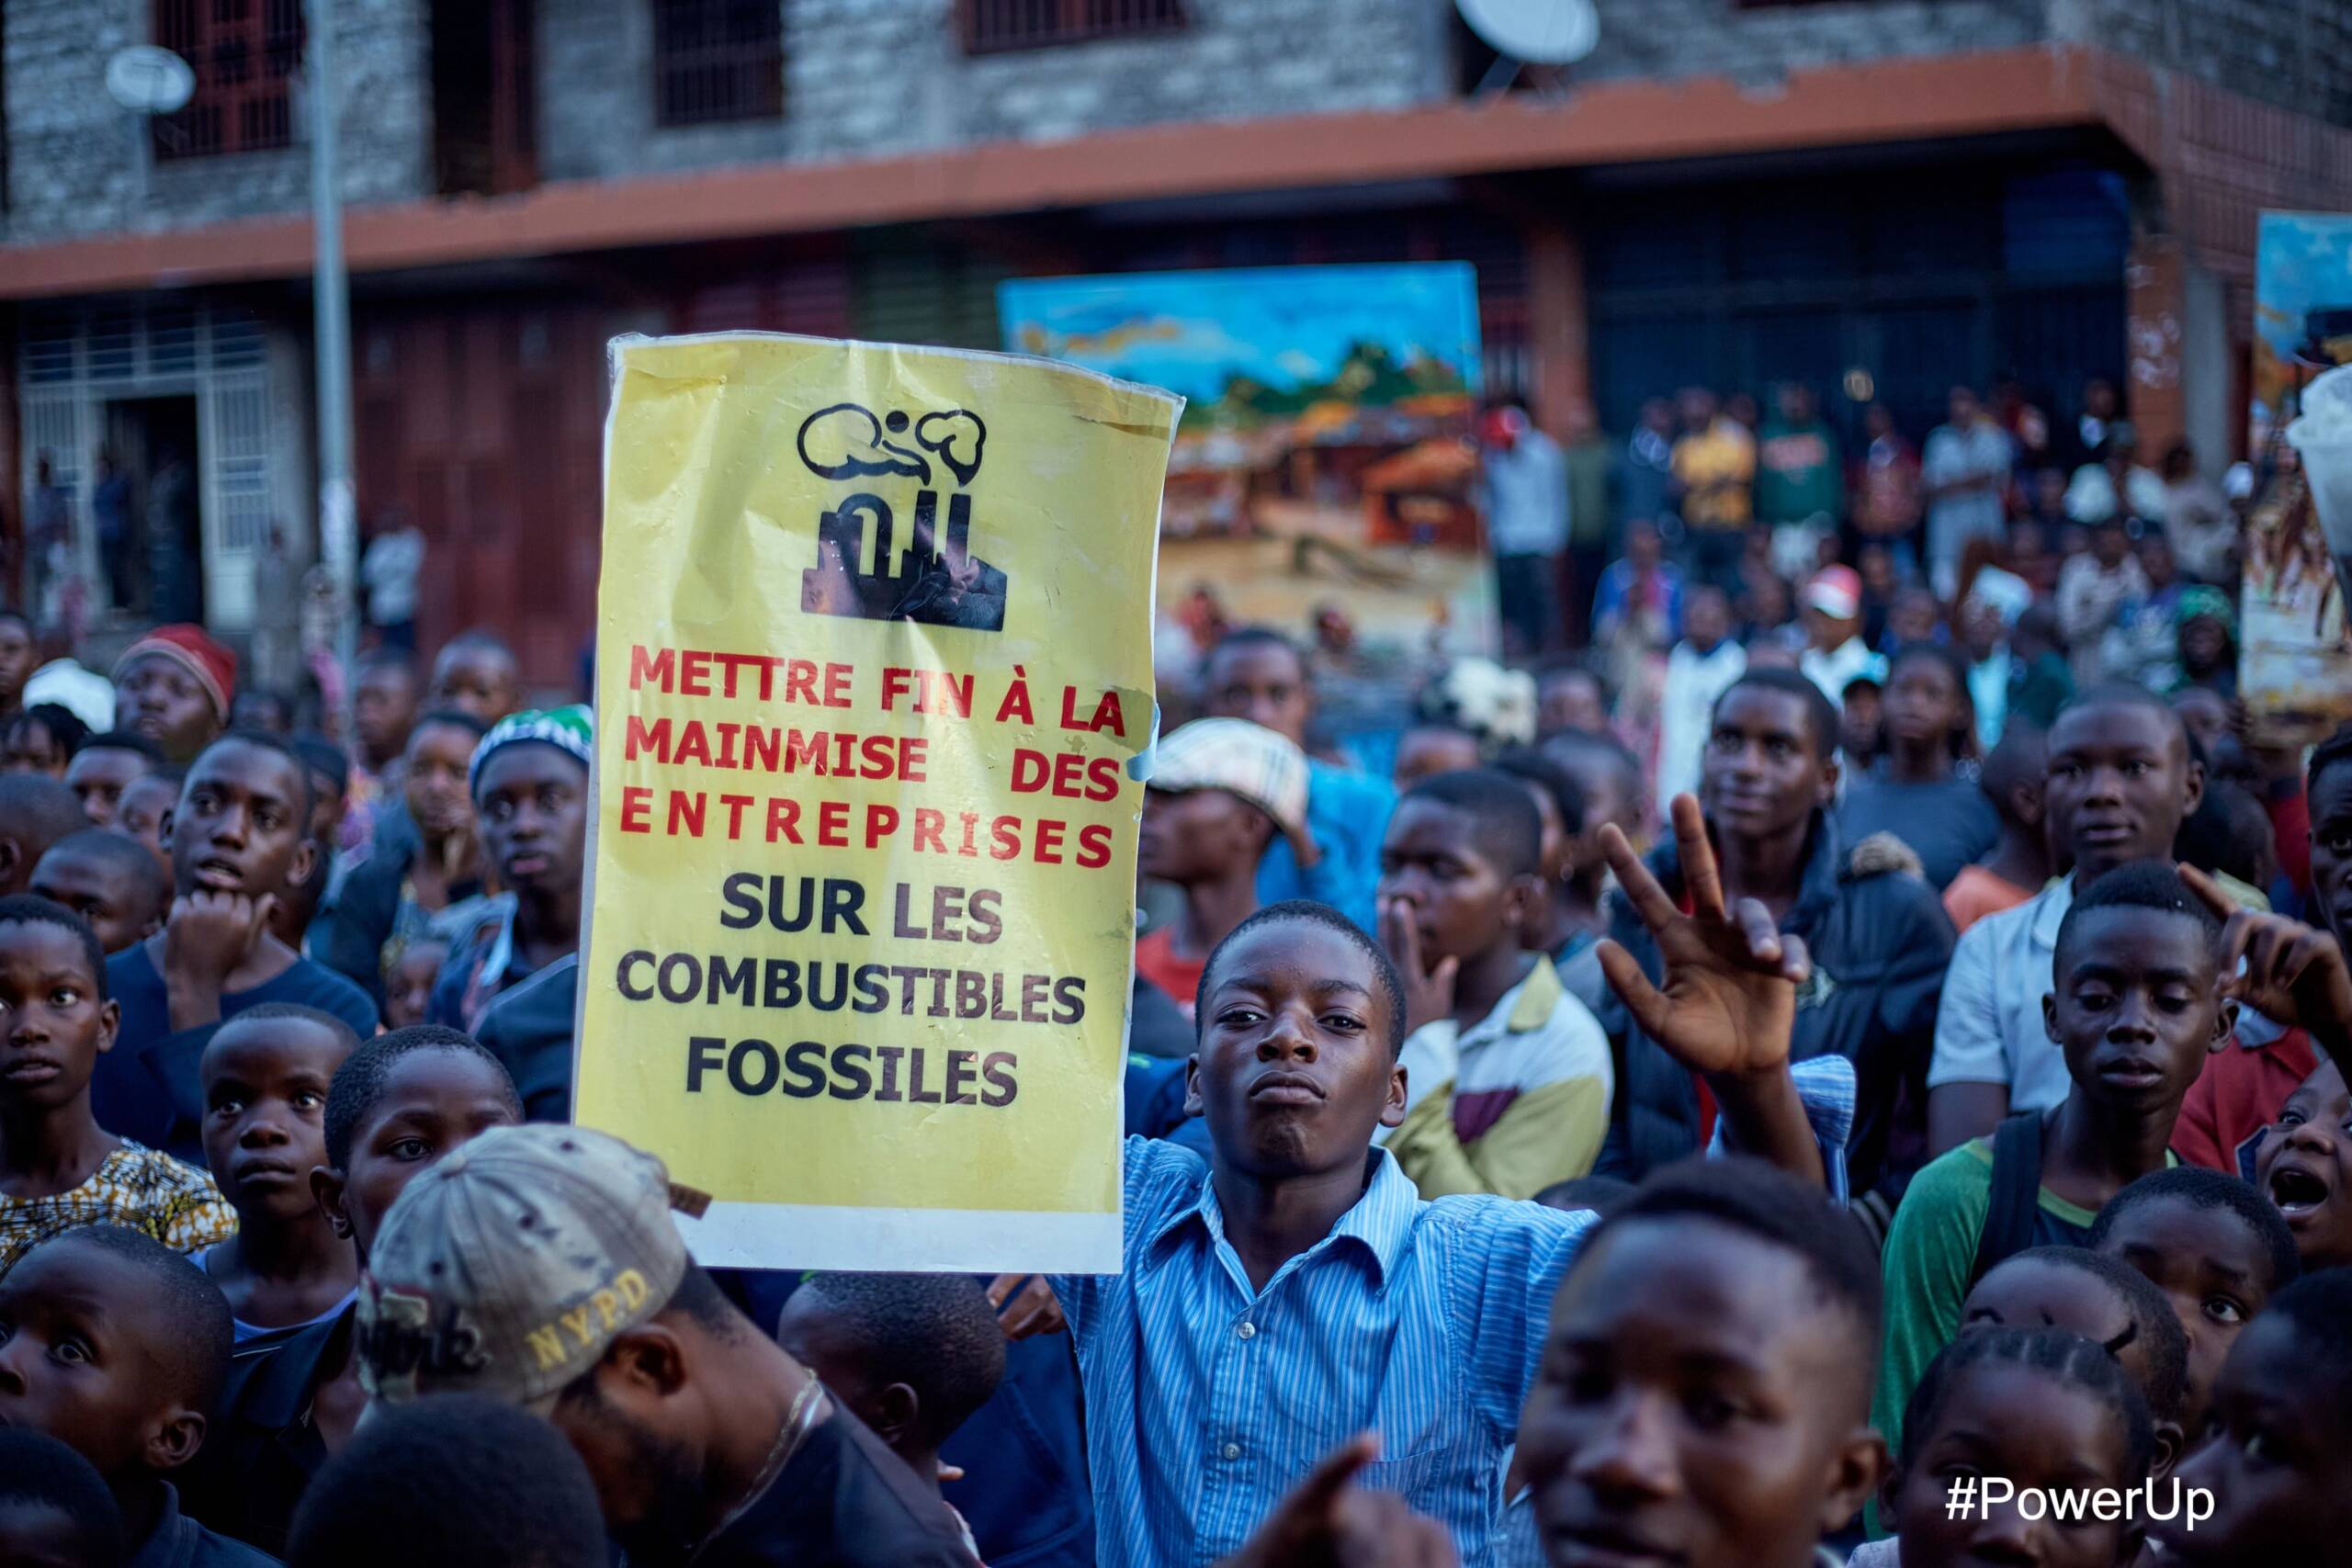 Goma, Democratic Republic of Congo, November 4: More than 500 people join a march, concert and artistic performances to call attention to the destruction caused by TotalEnergies, Soco and Efora Perenco in the Great Lakes region. Photo credit: 350 Africa